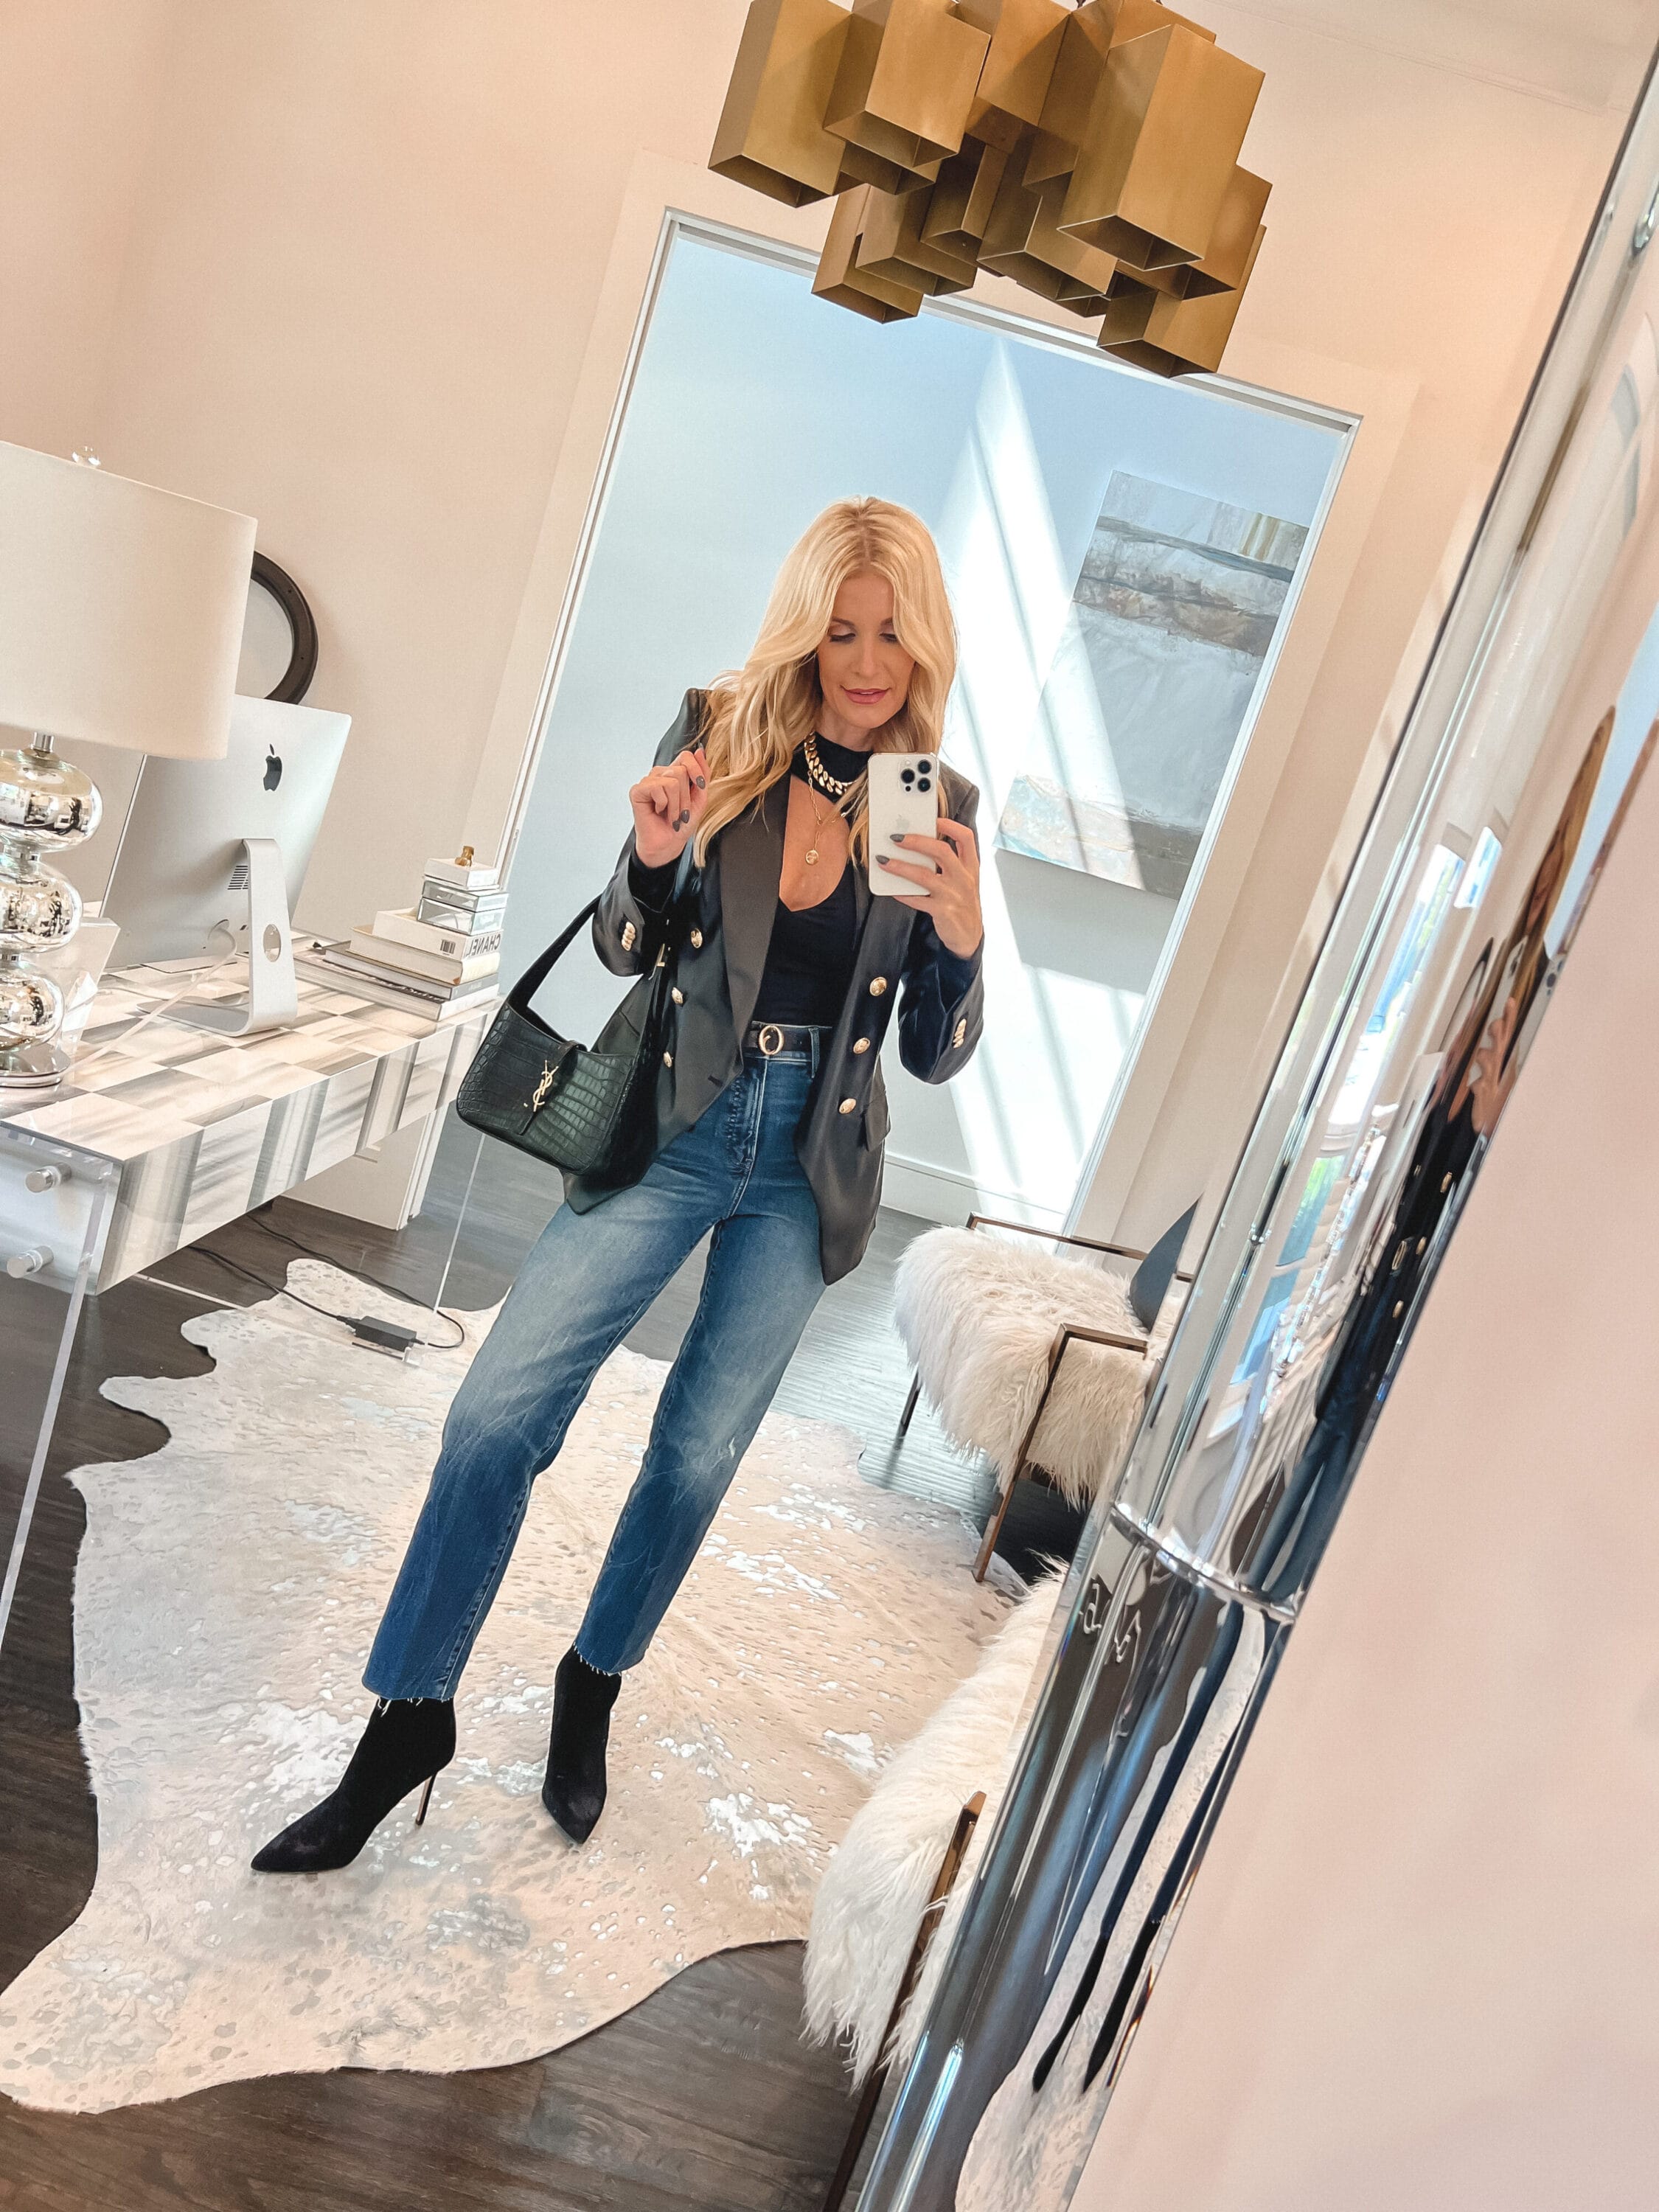 Over 40 fashion influencer wearing a black faux leather blazer from Revolve as one of October's best sellers.